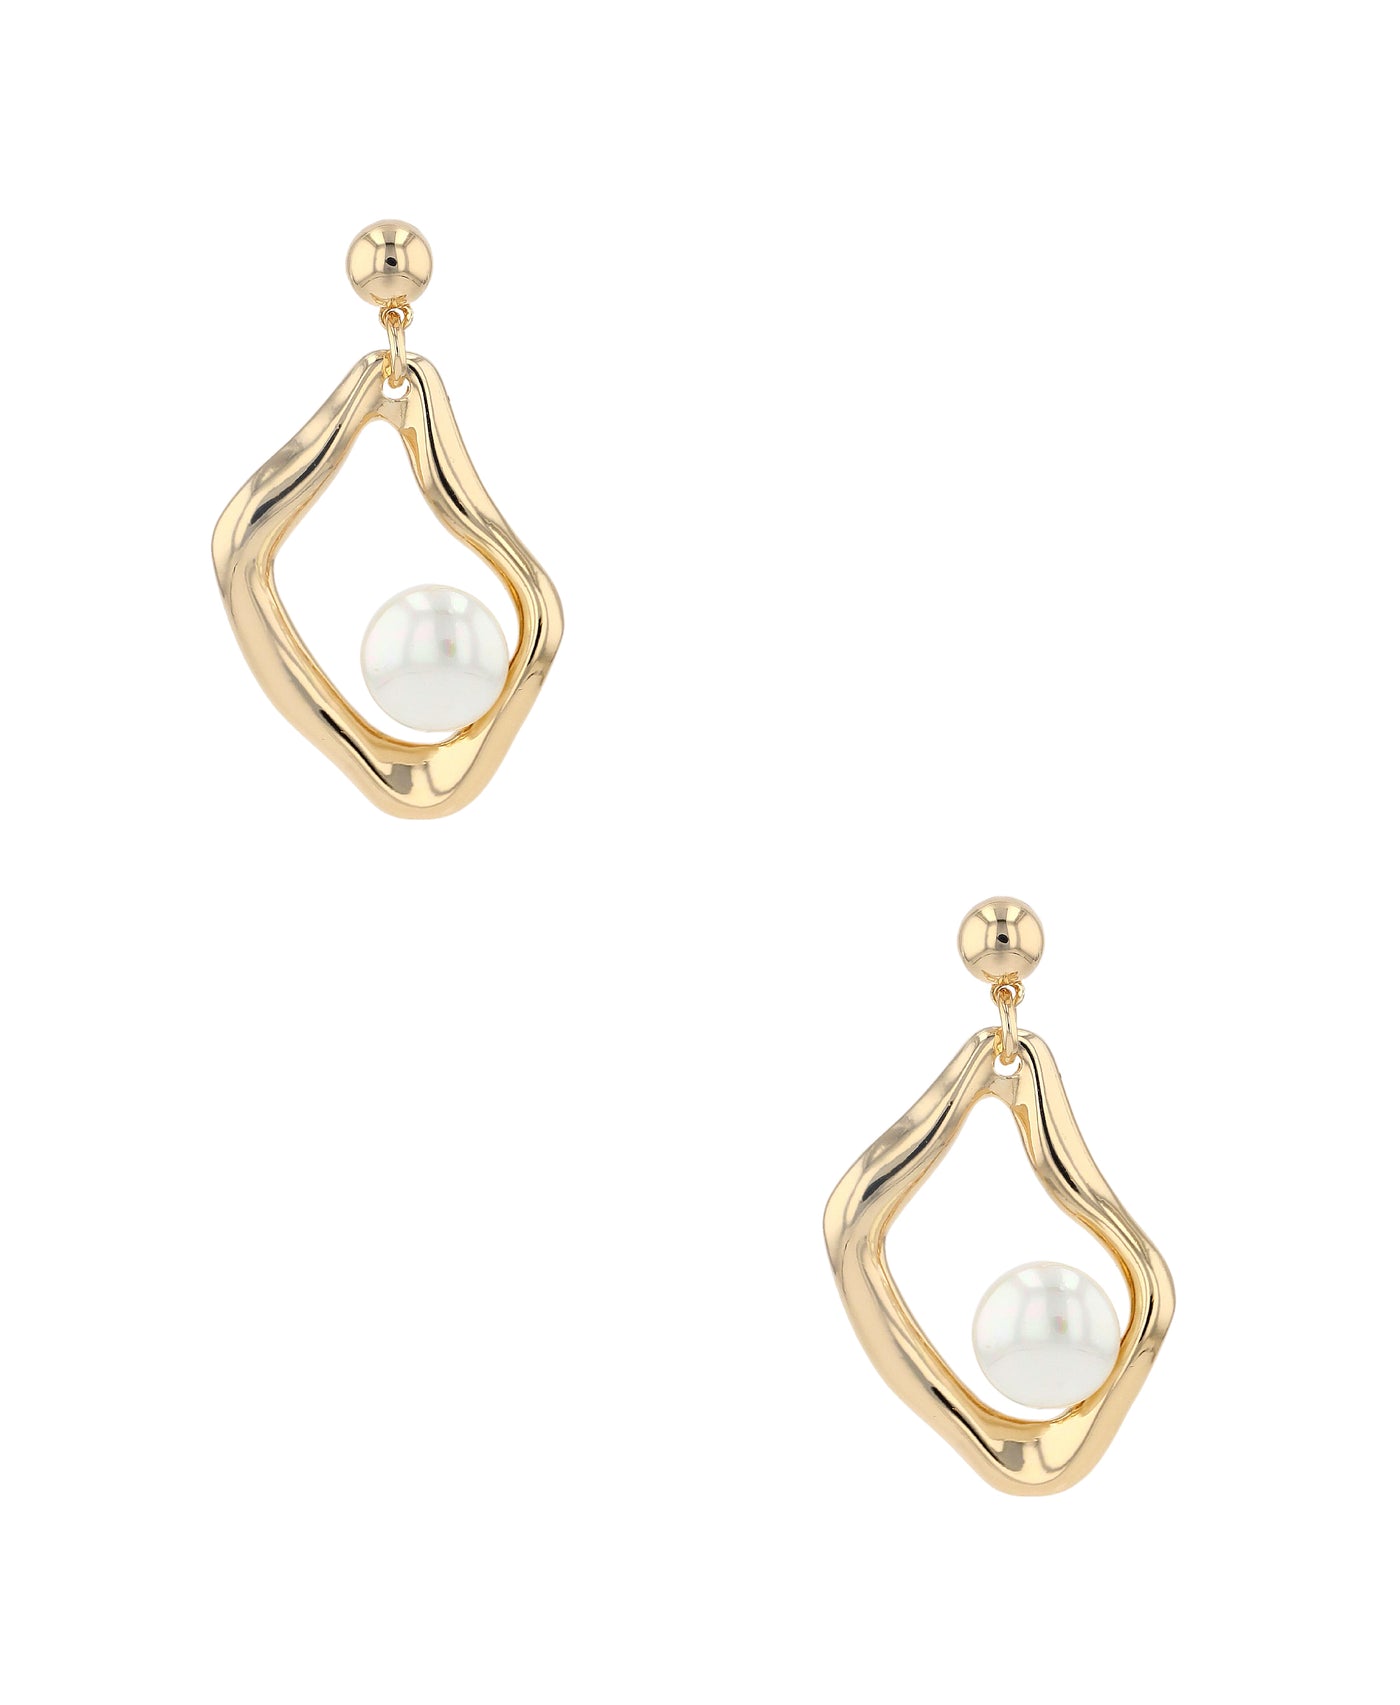 Abstract Drop Earrings w/ Faux Pearl image 1